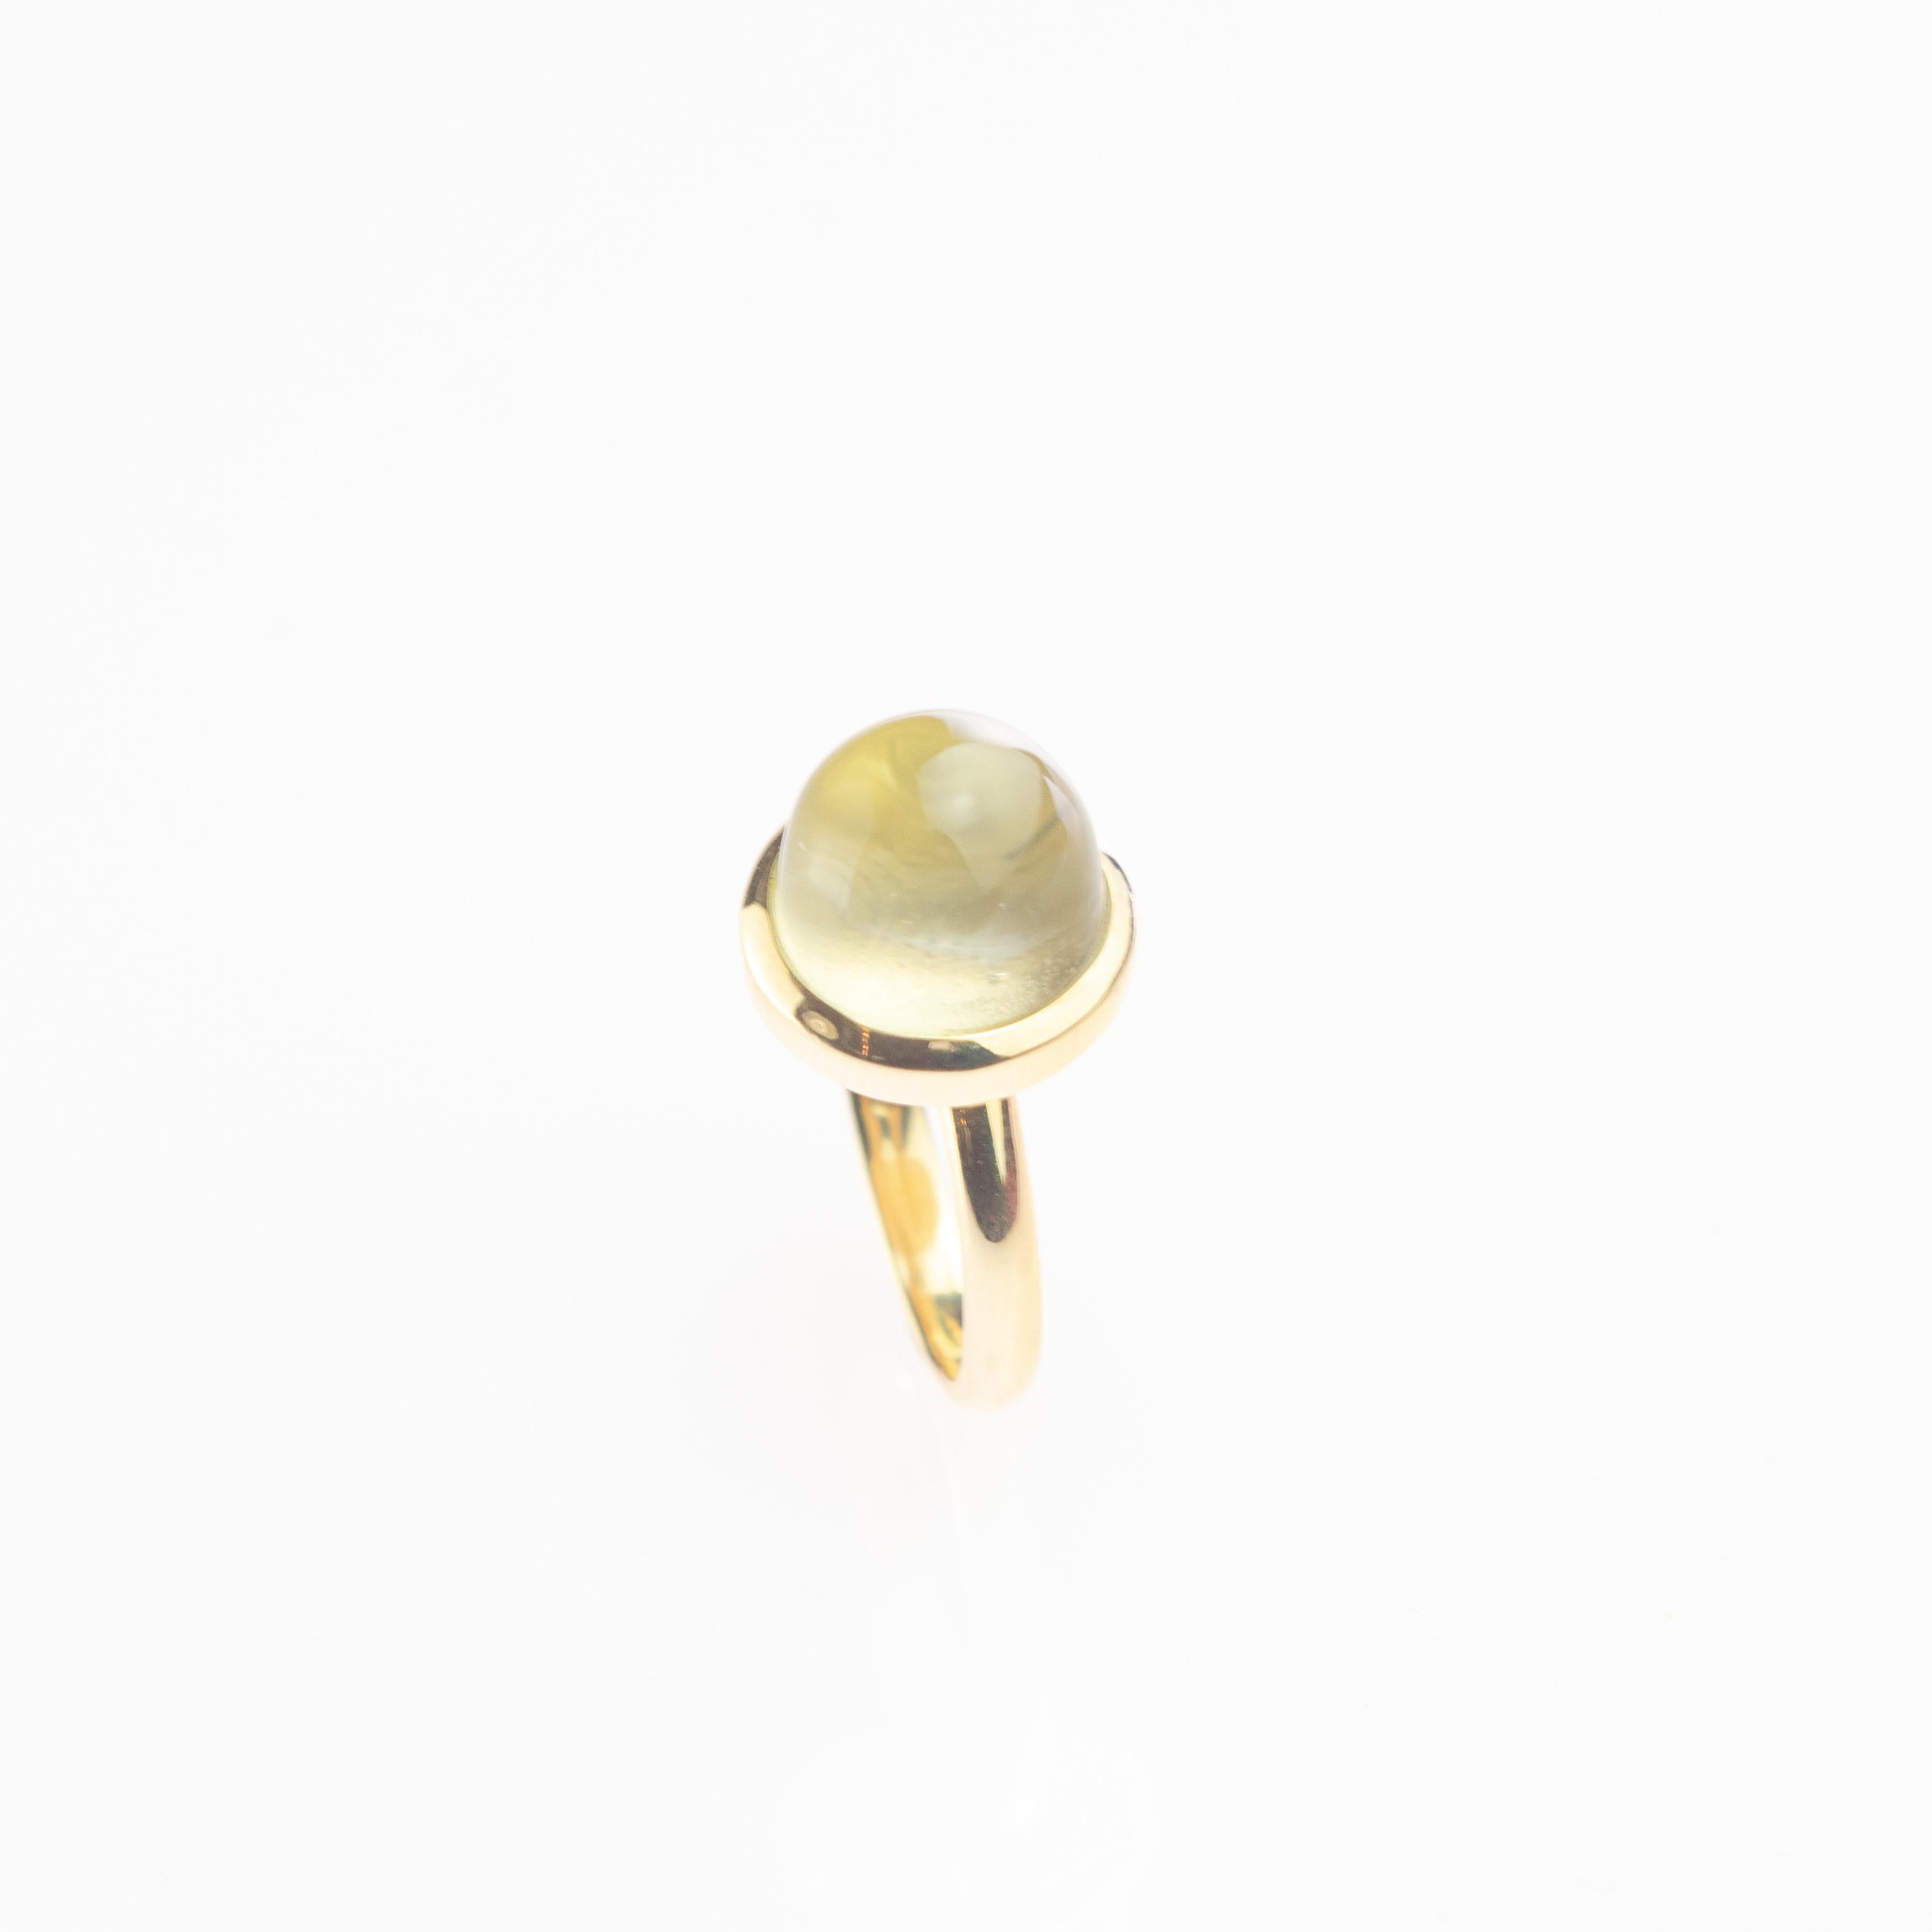 Rock crystal band cocktail ring. A a bright jewel with a minimalist design that enhances a matte pulish precious natural rock crystal  round stepped cabochon. The 18 karat yellow gold ring highlights the natural and sparkling color, surrounding into